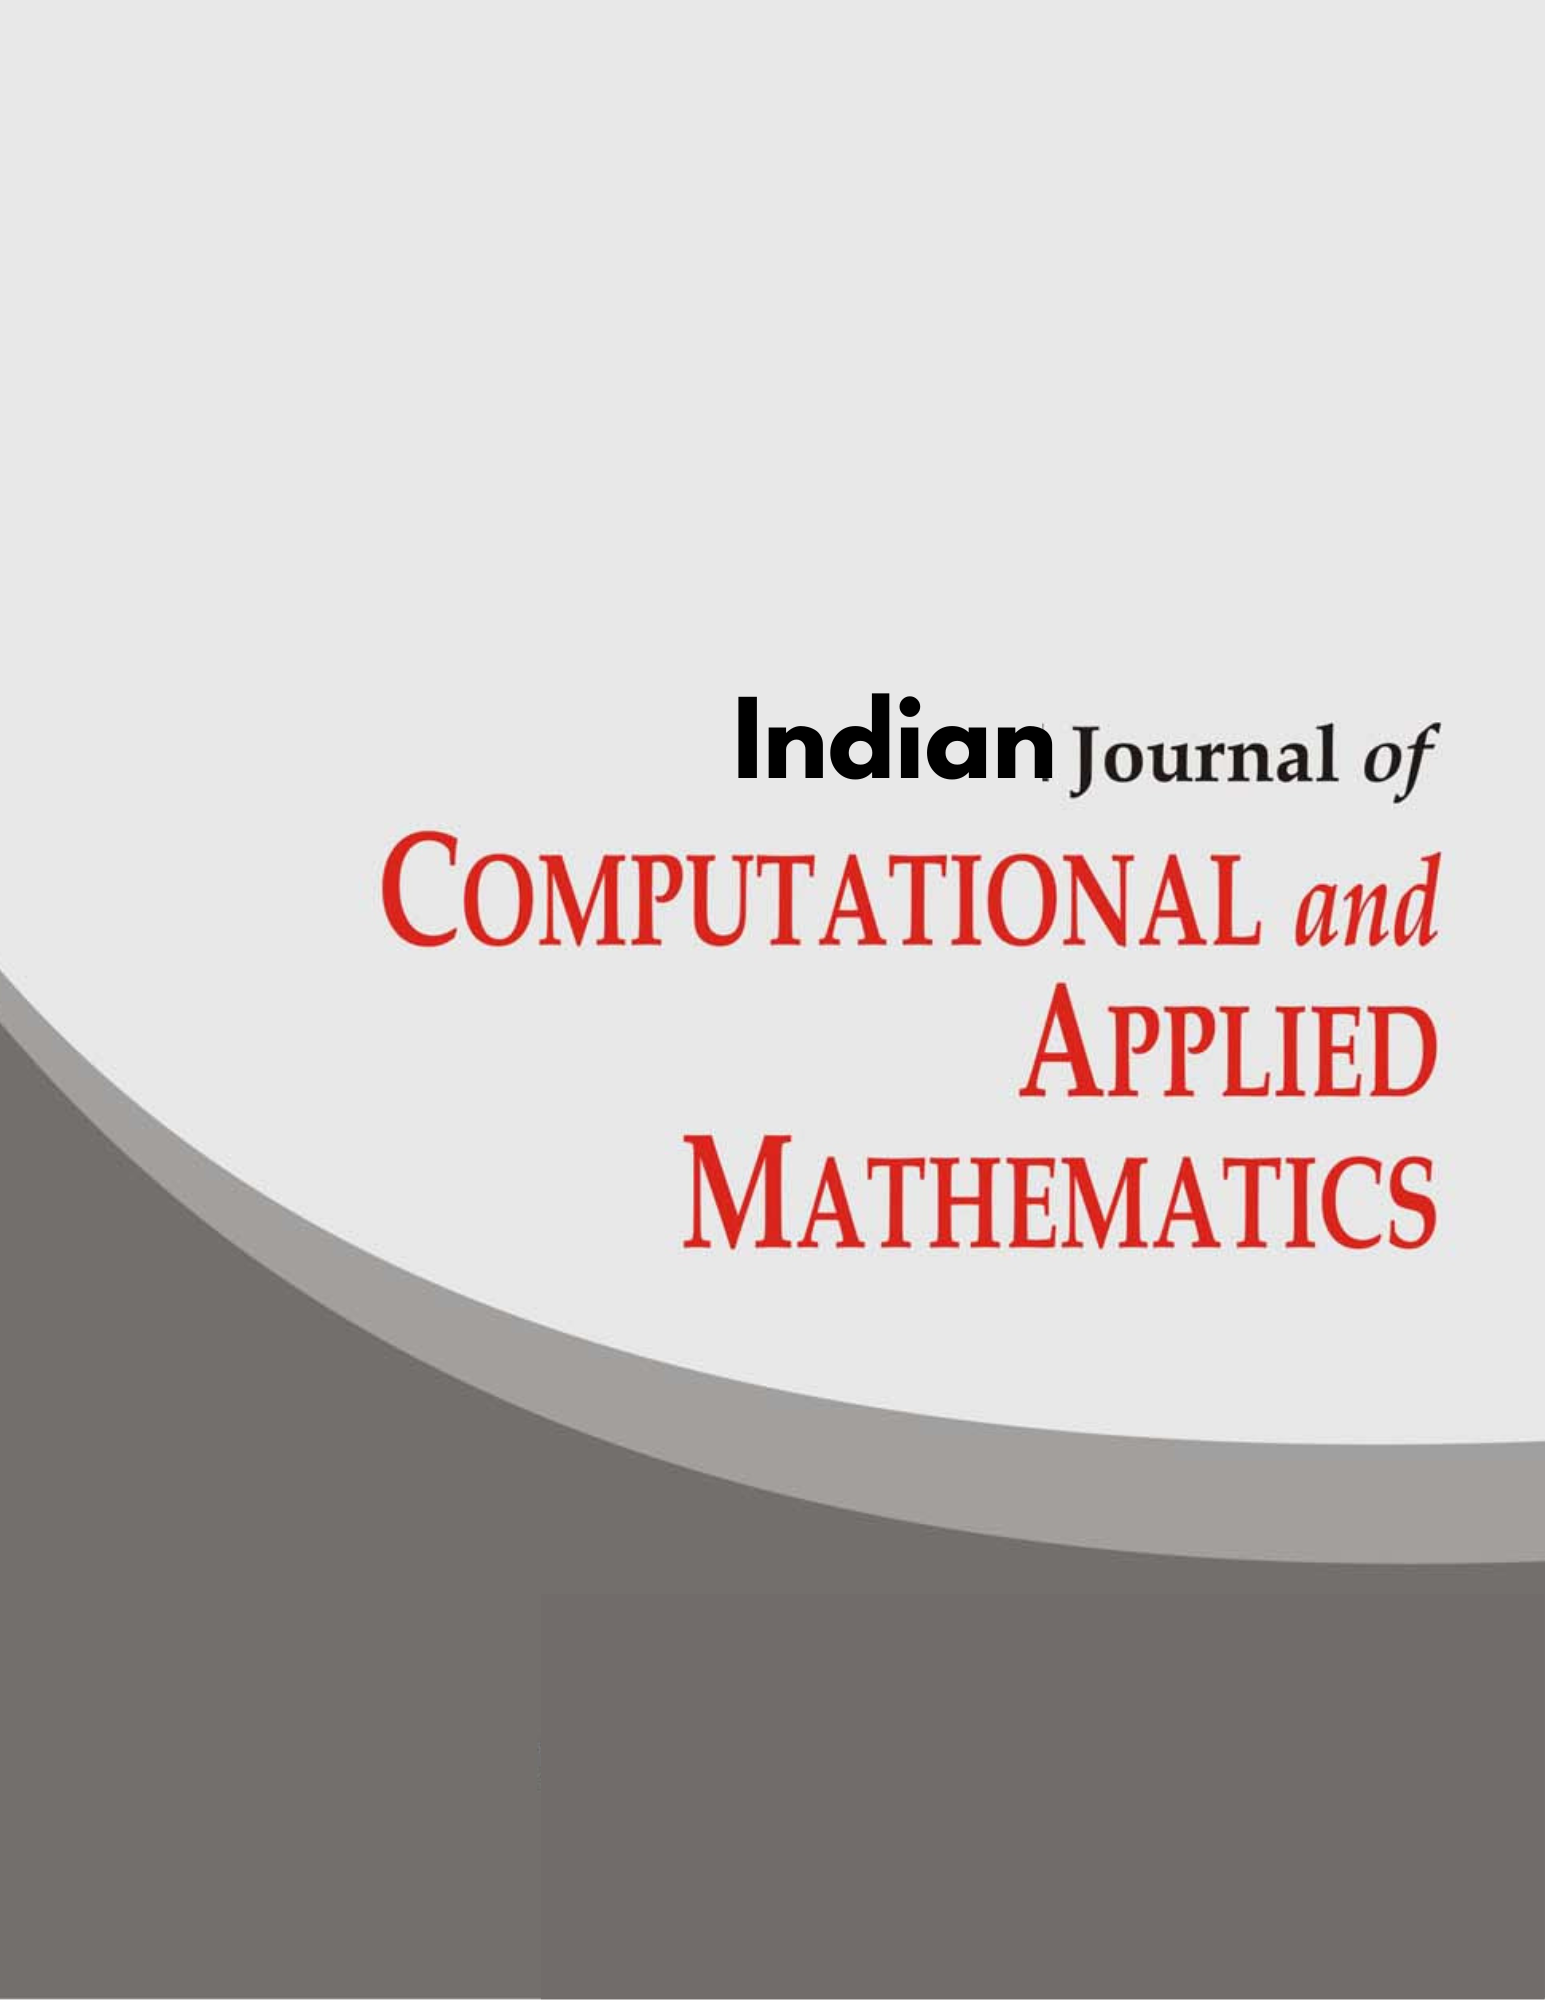 Indian Journal of Computational and Applied Mathematics